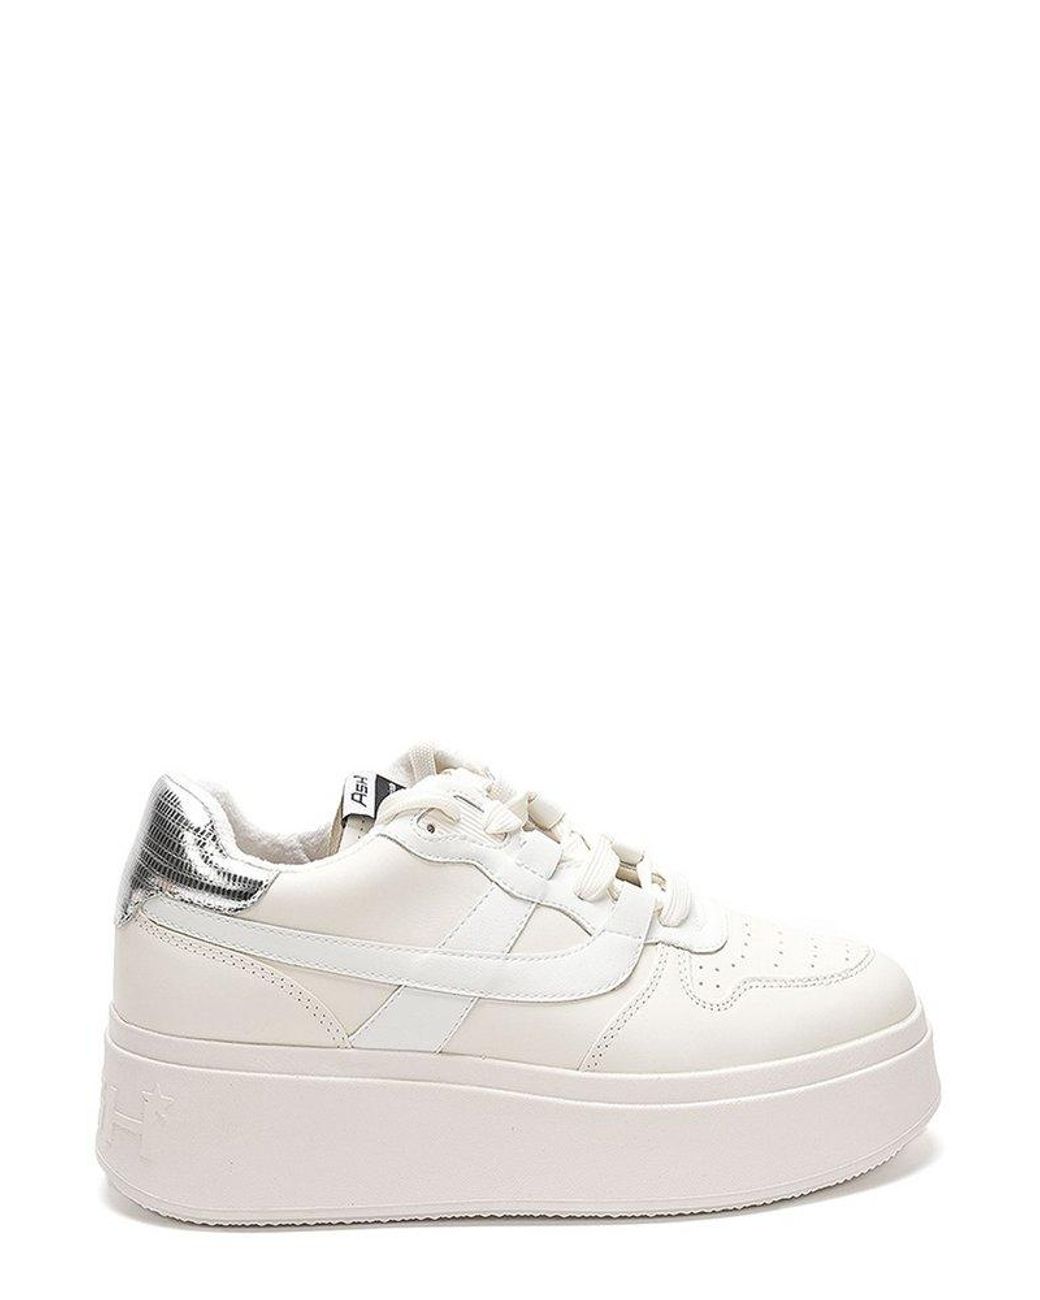 Ash Match Lace-up Sneakers in White | Lyst